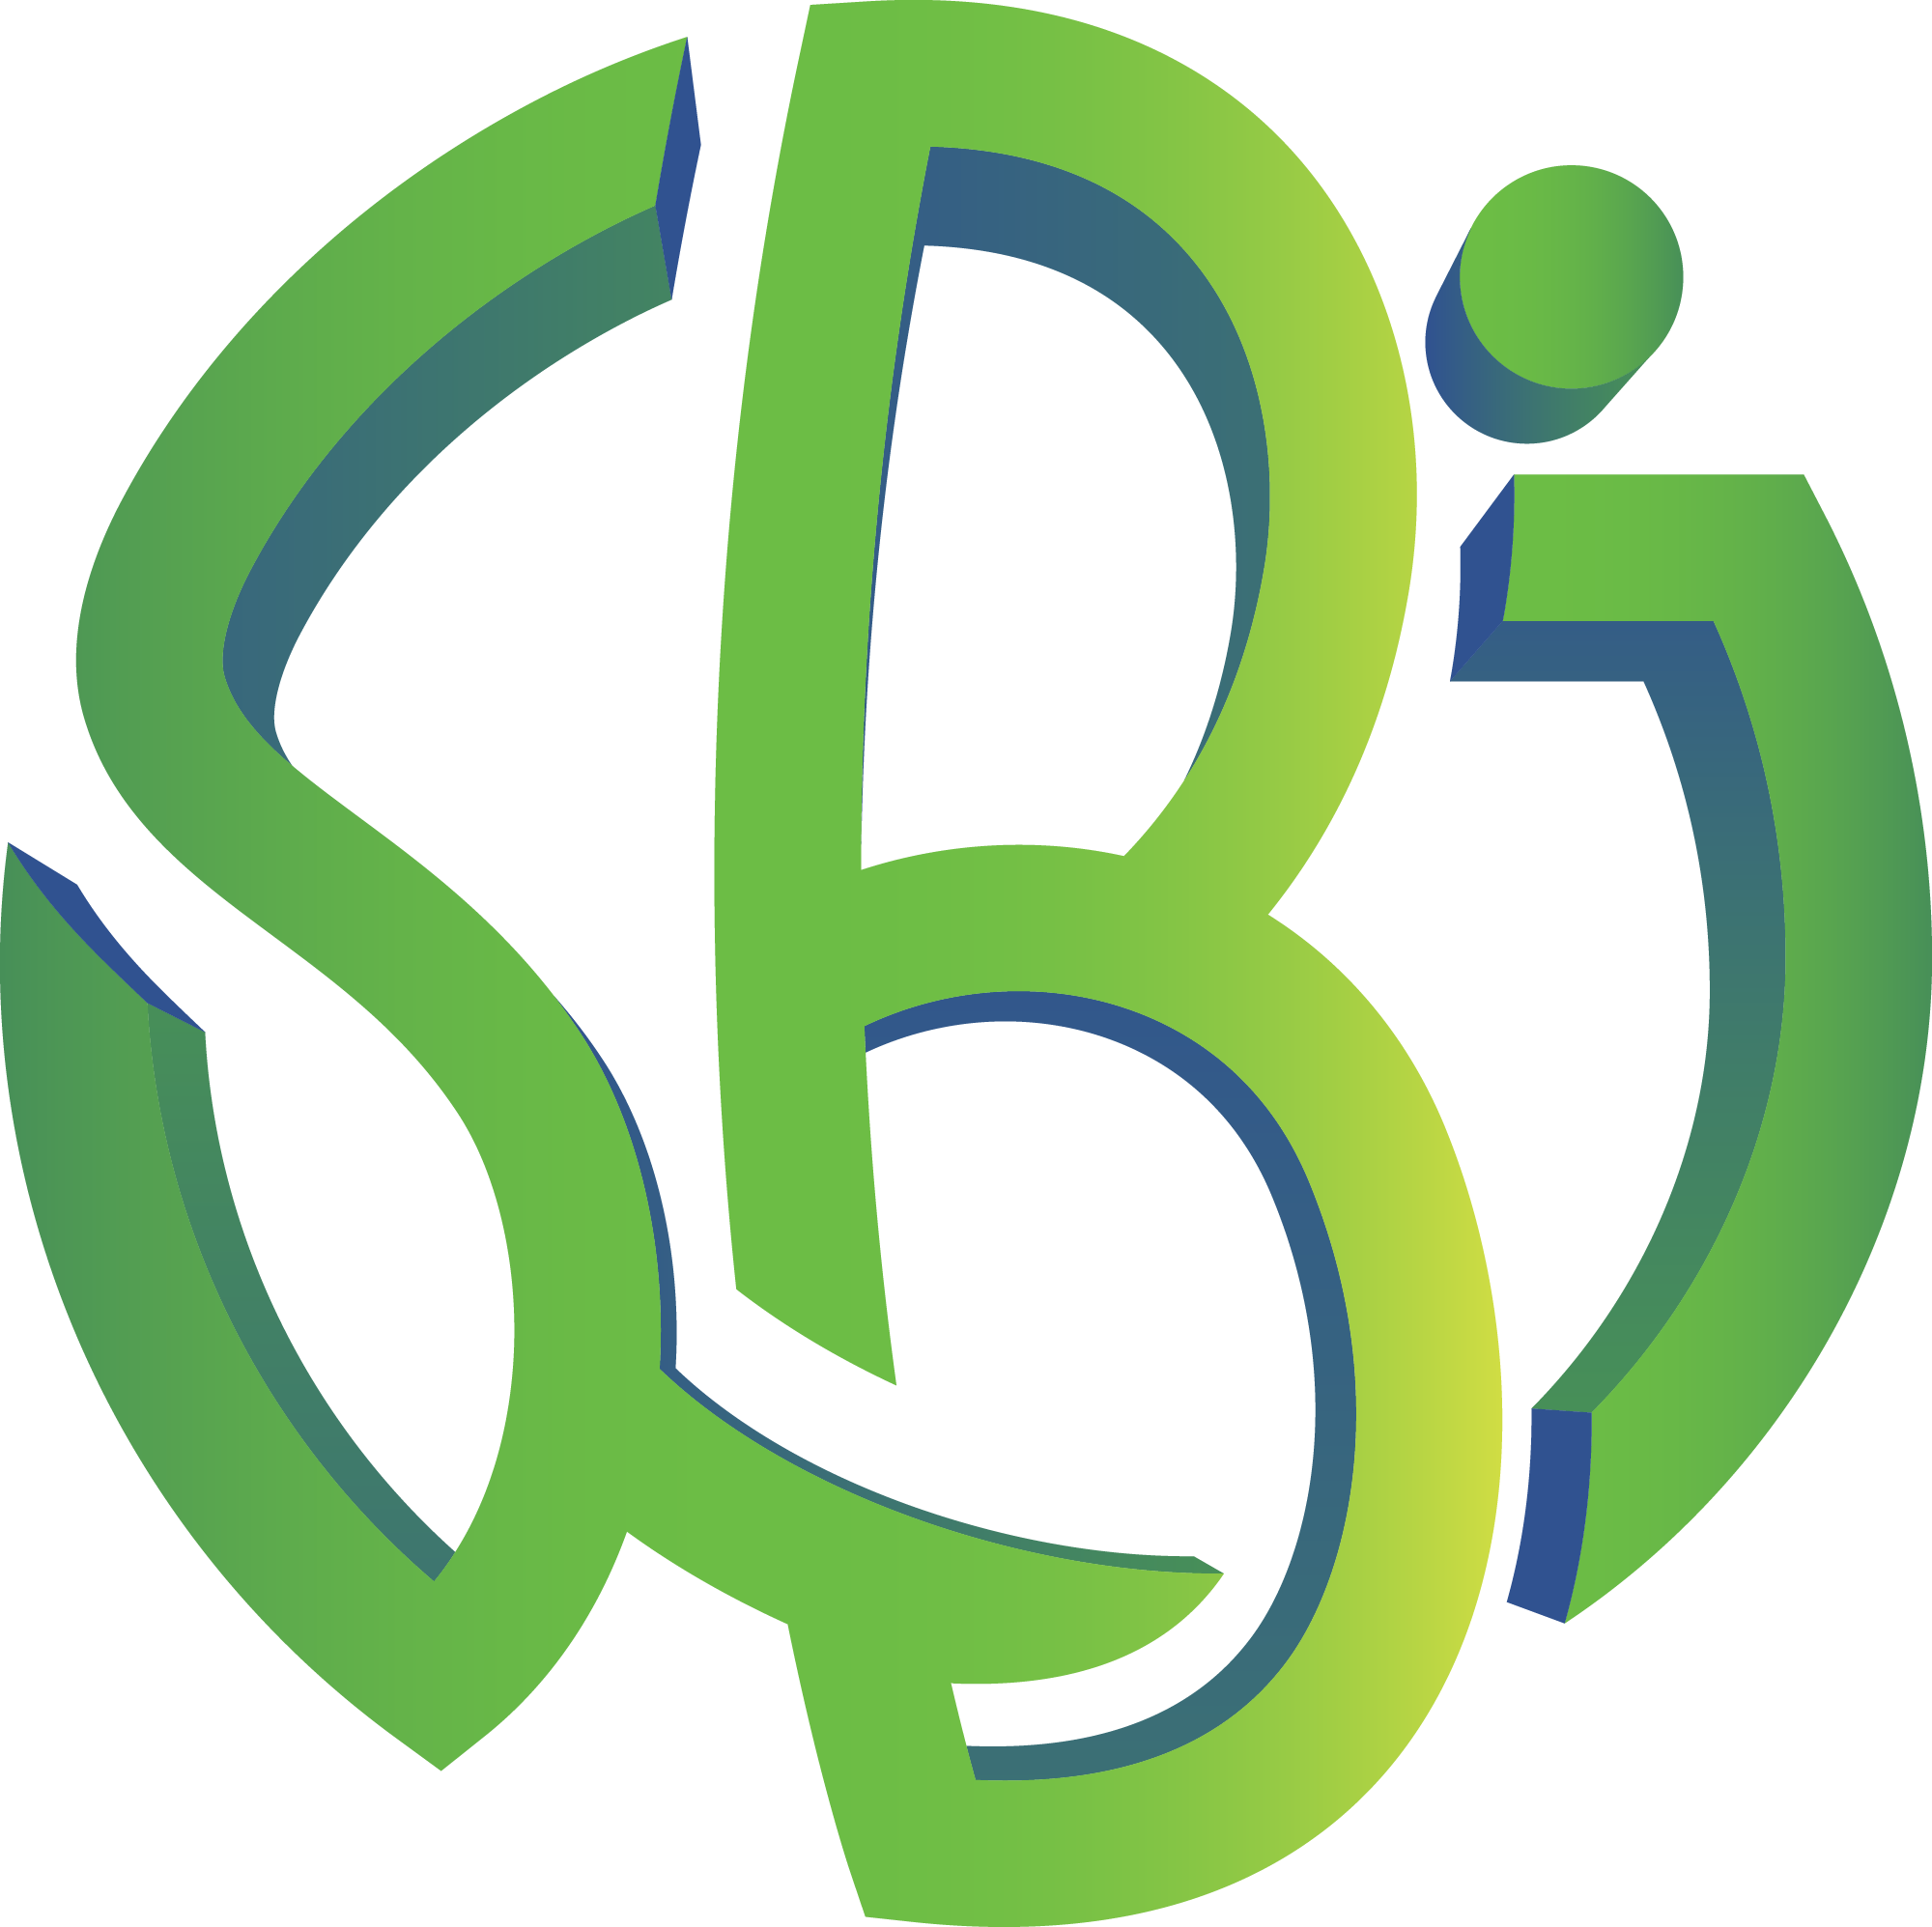 /assets/sbi-logos/sbi-icon---color.png9a